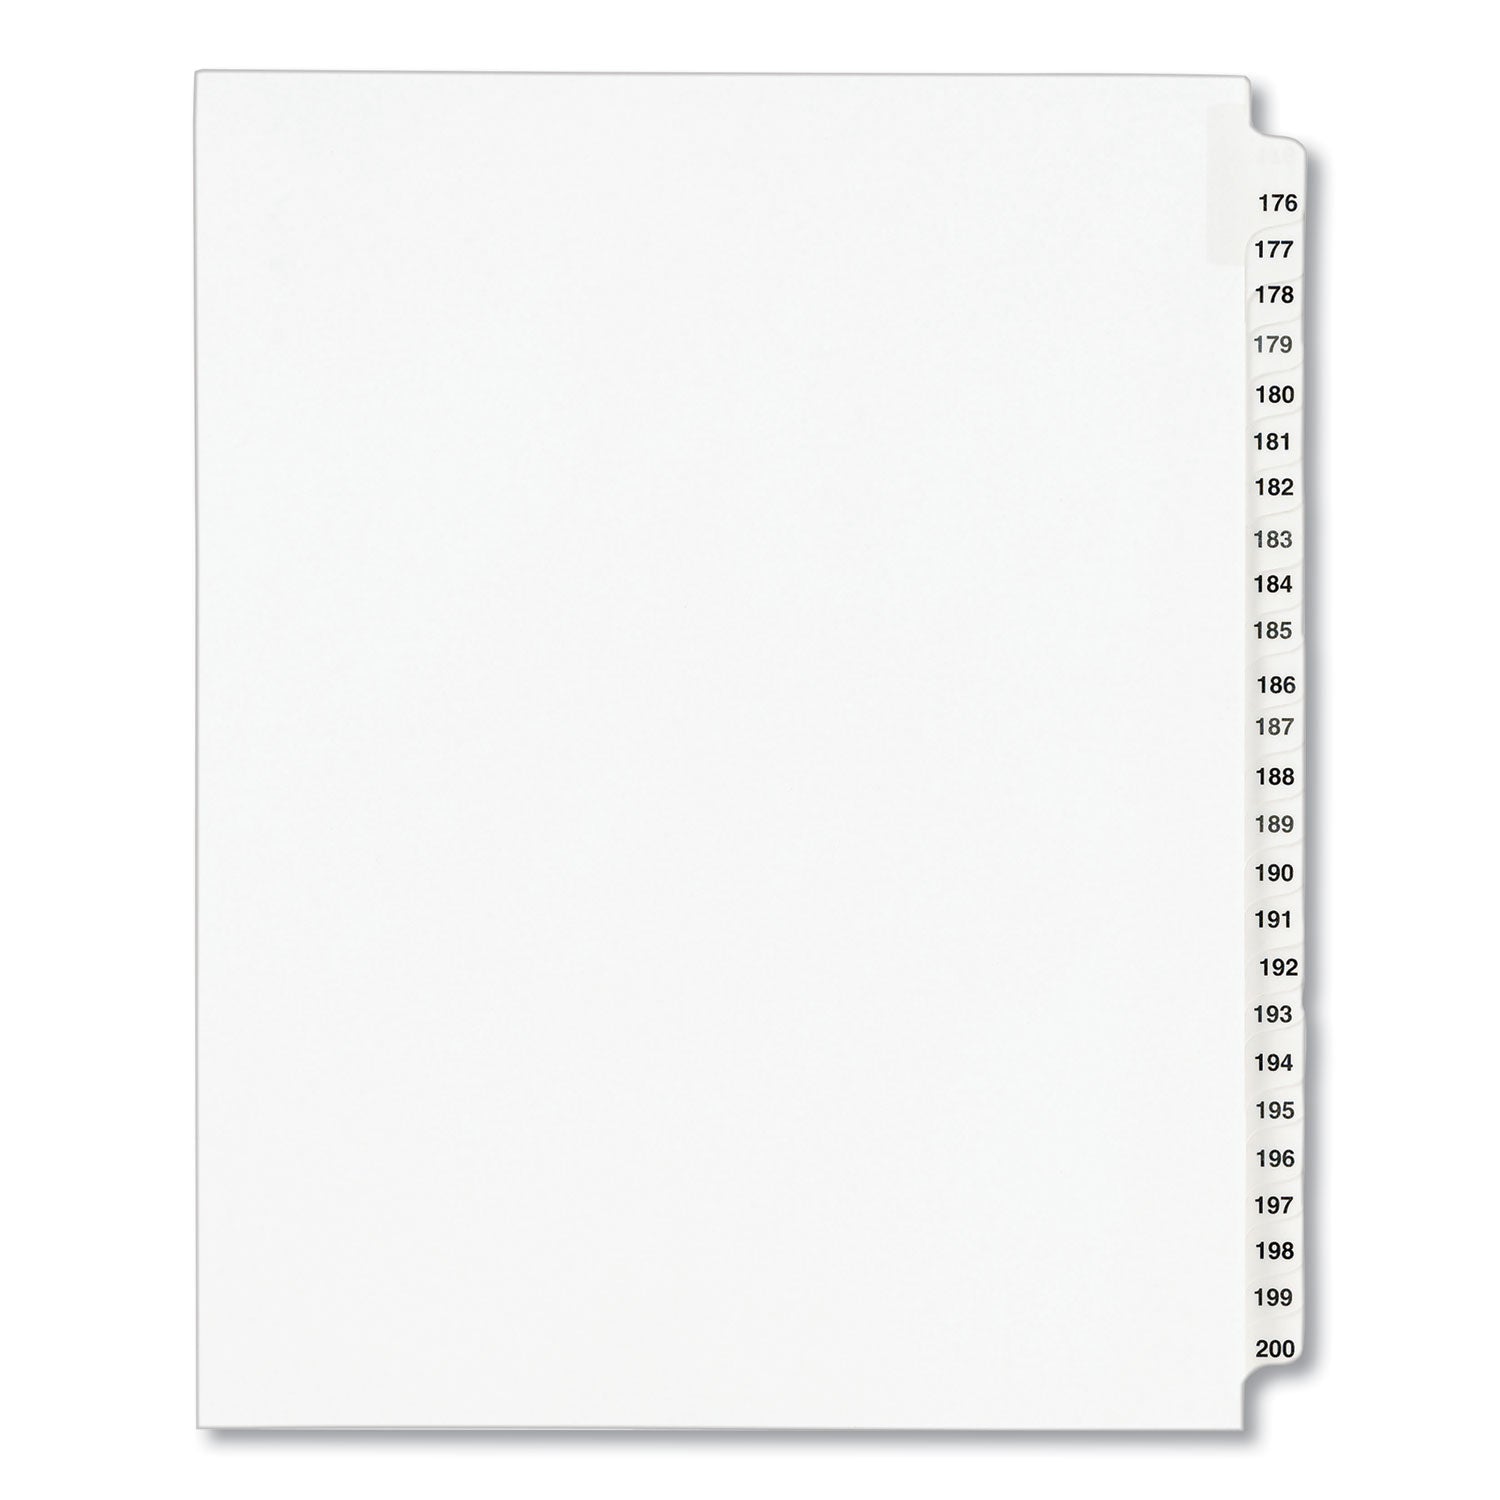 Preprinted Legal Exhibit Side Tab Index Dividers, Avery Style, 25-Tab, 176 to 200, 11 x 8.5, White, 1 Set, (1337) - 